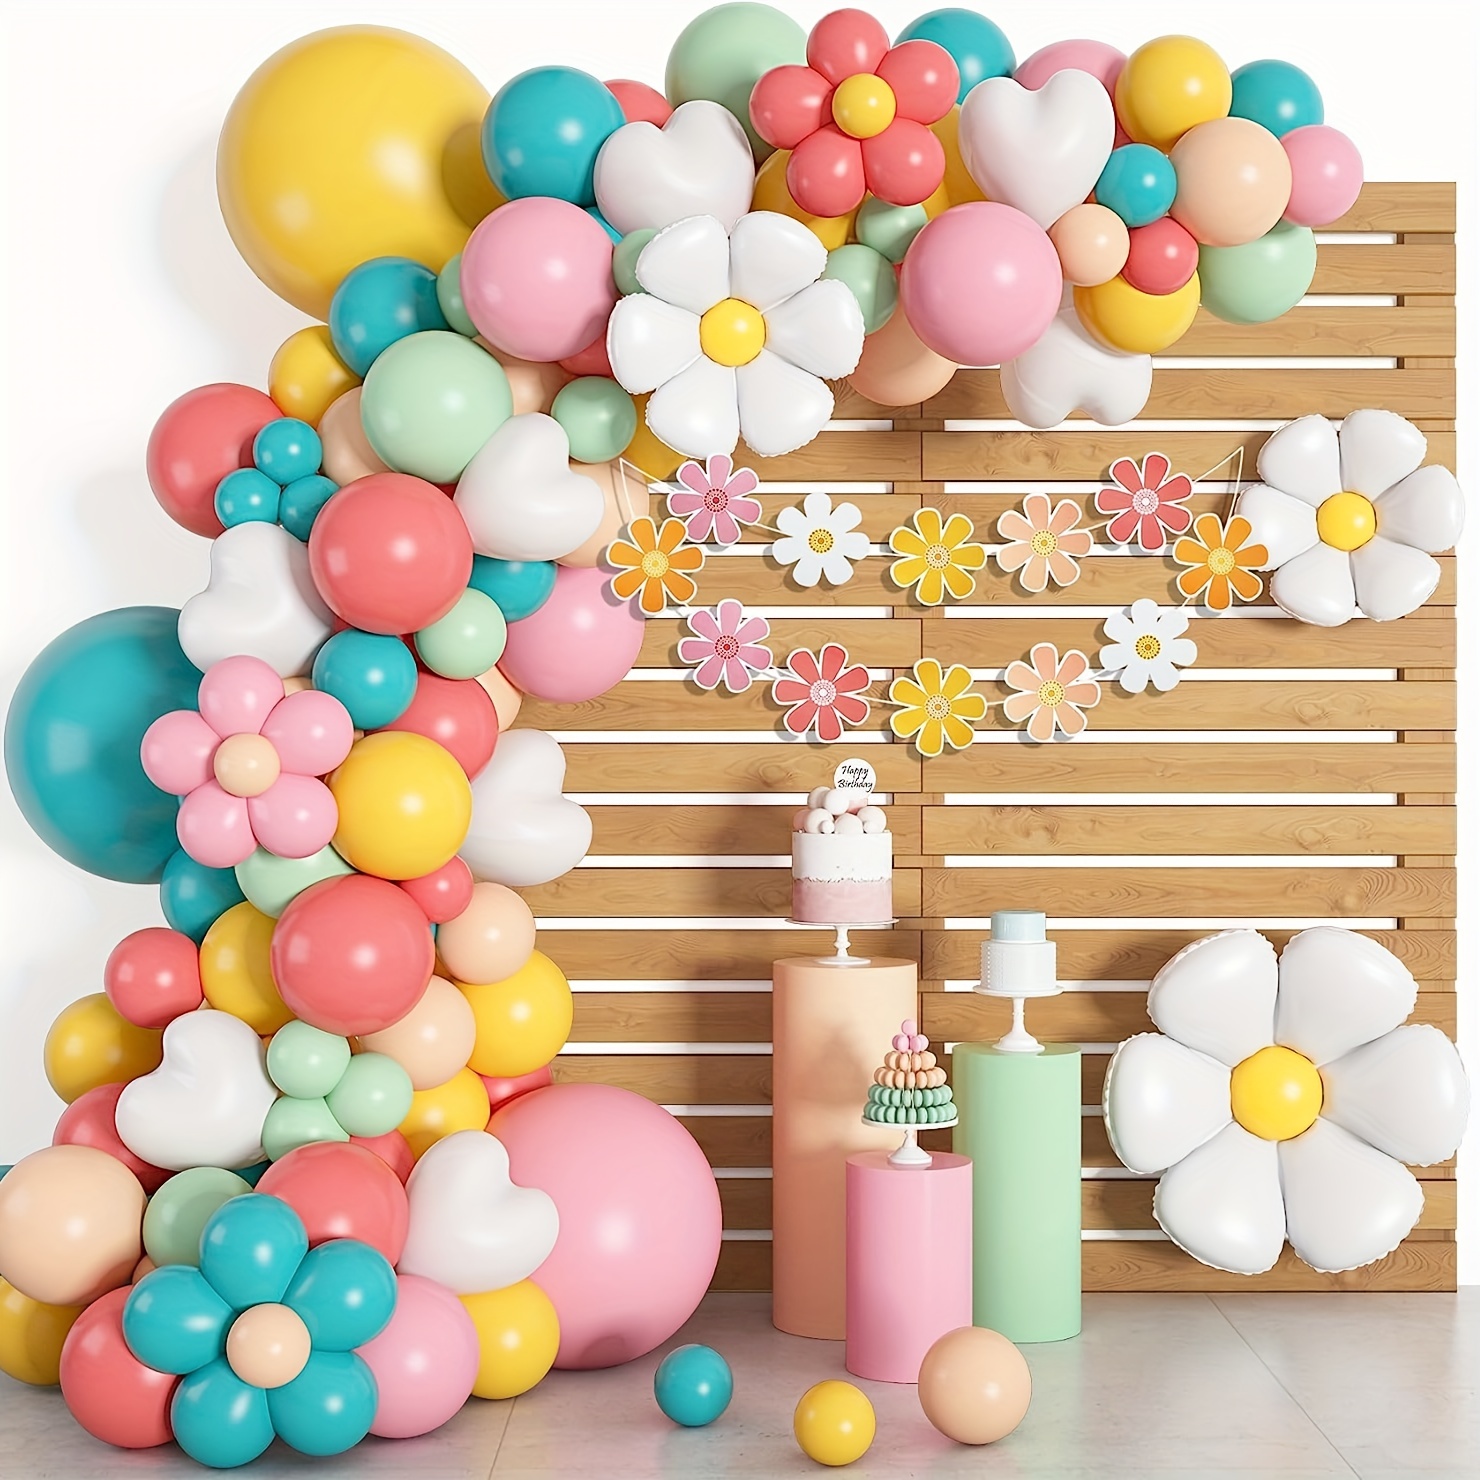  Yellow Balloons 110 Pcs Pastel Yellow Balloon Garland Kit  Different Sizes 5 10 12 18 Inch Light Yellow Balloons for Flower Baby  Shower Birthday Party Decorations : Toys & Games